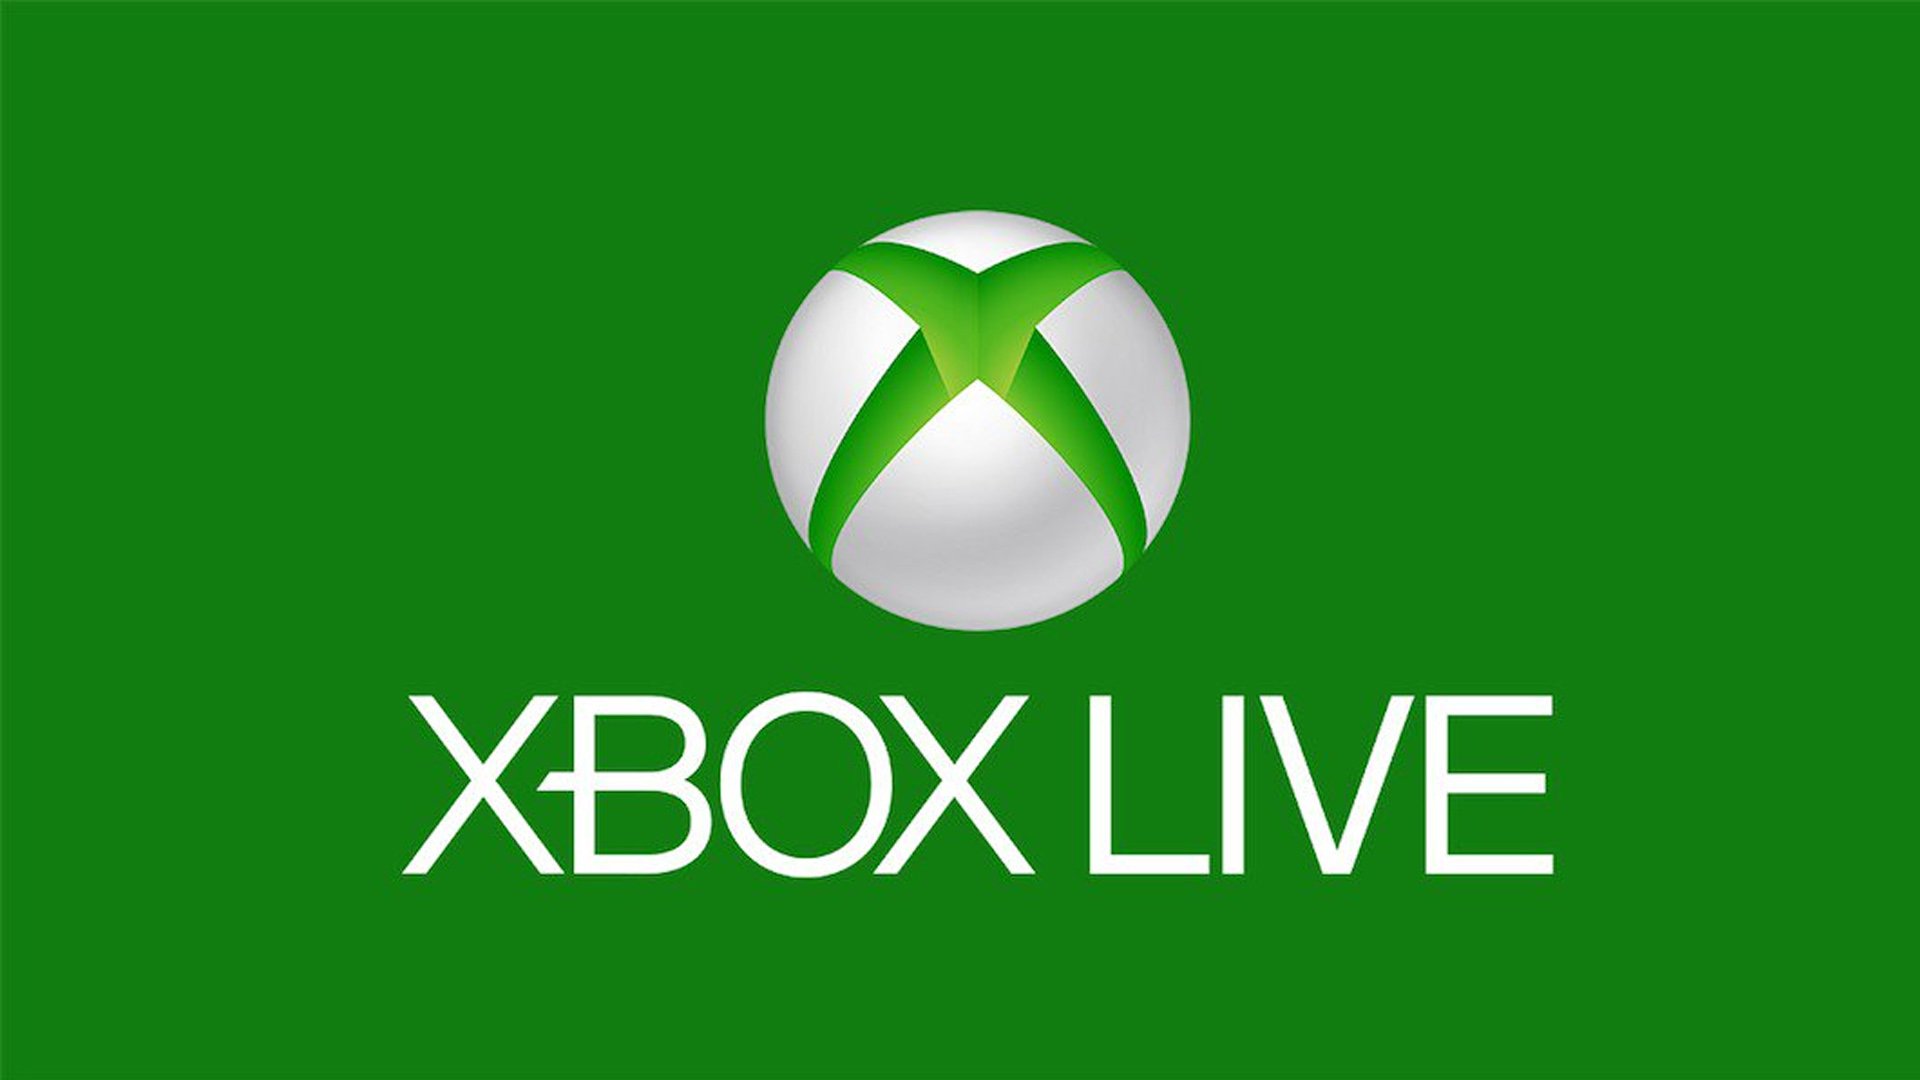 More Xbox Live features heading to Switch - Nintendo Wire